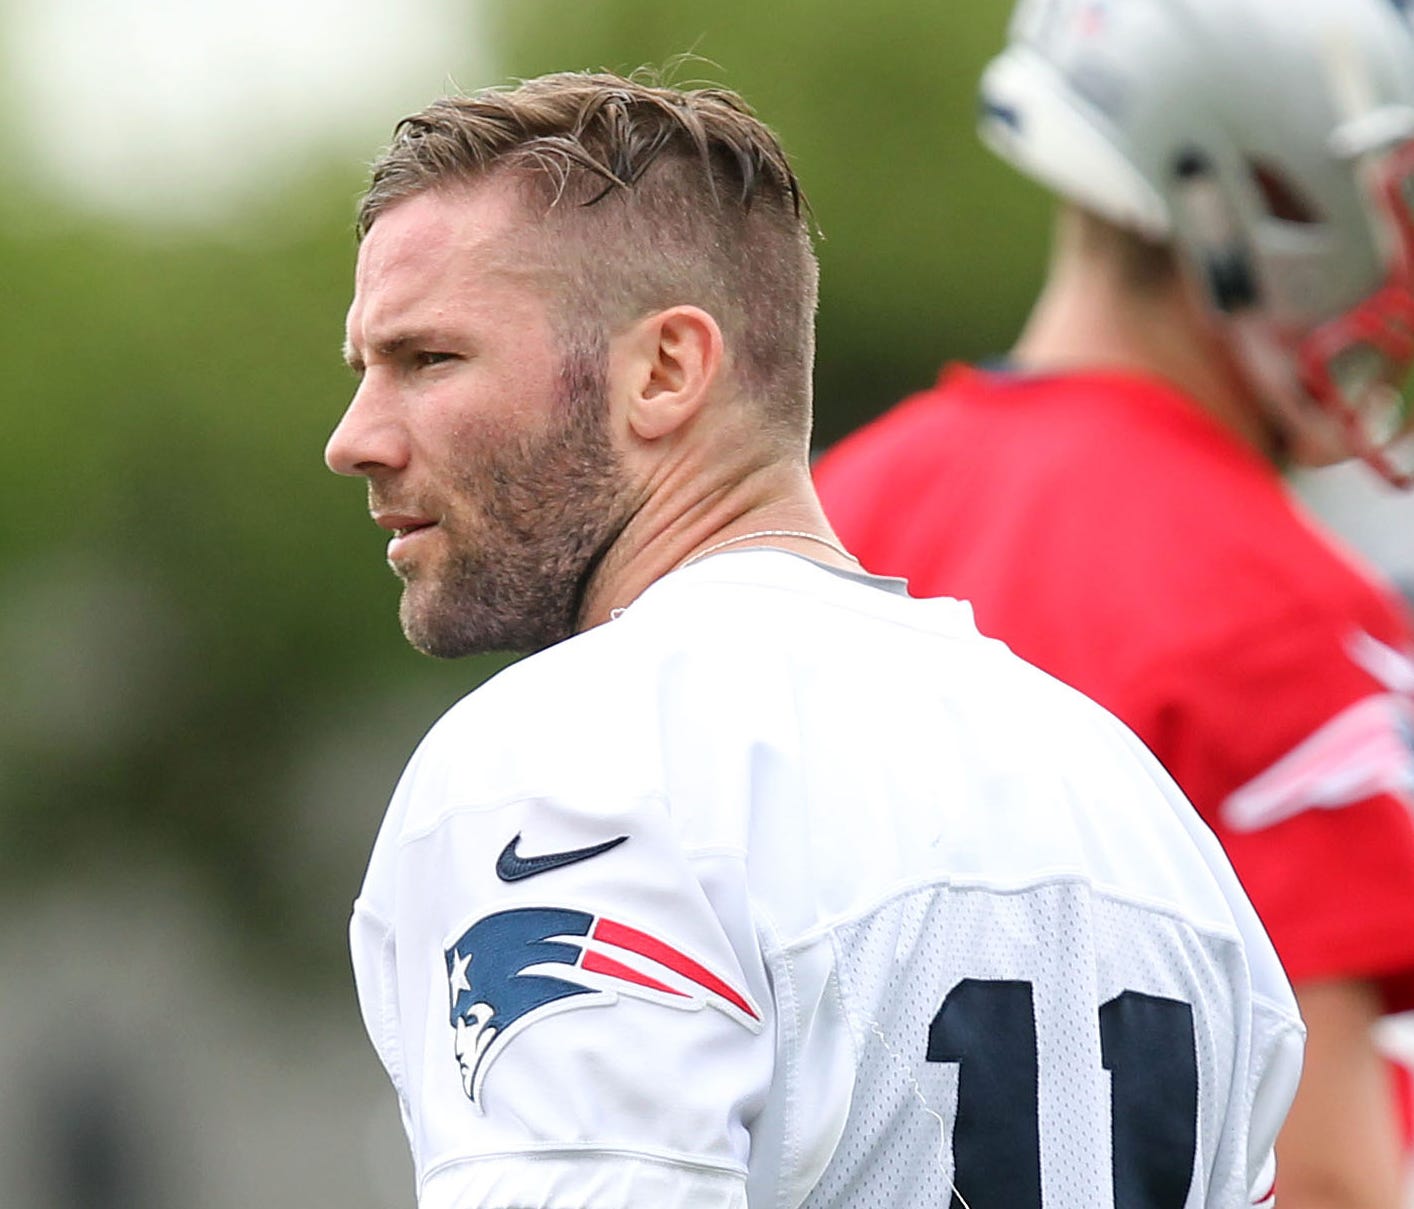 Patriots WR Julian Edelman had seemed on track to return from a knee injury this spring until reports of his suspension surfaced.